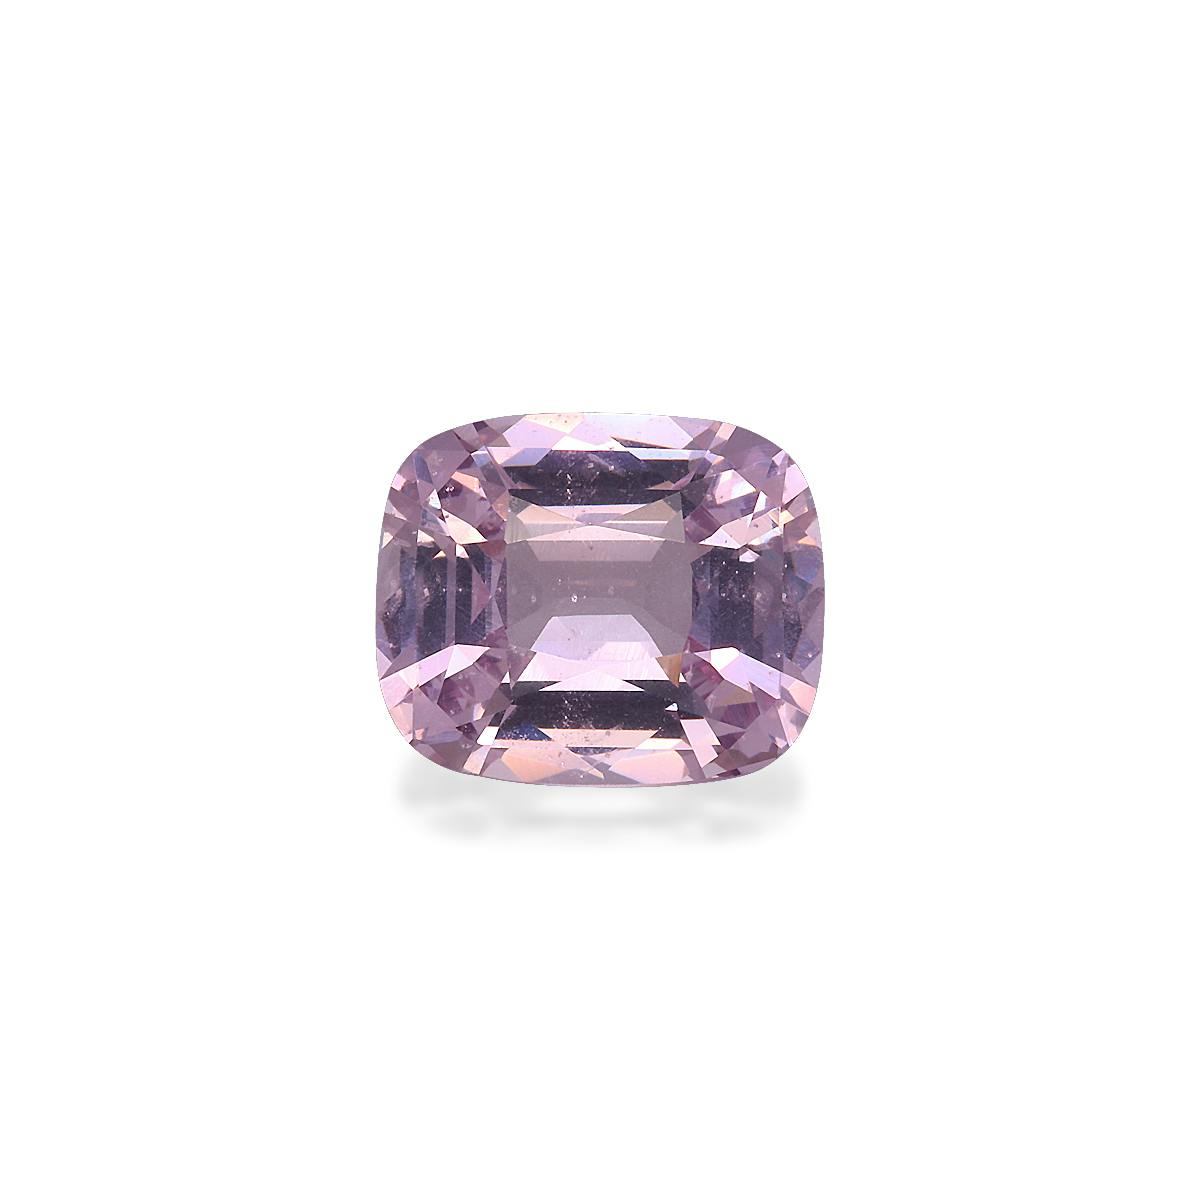 Grey Spinel 3.08ct (SP0093)